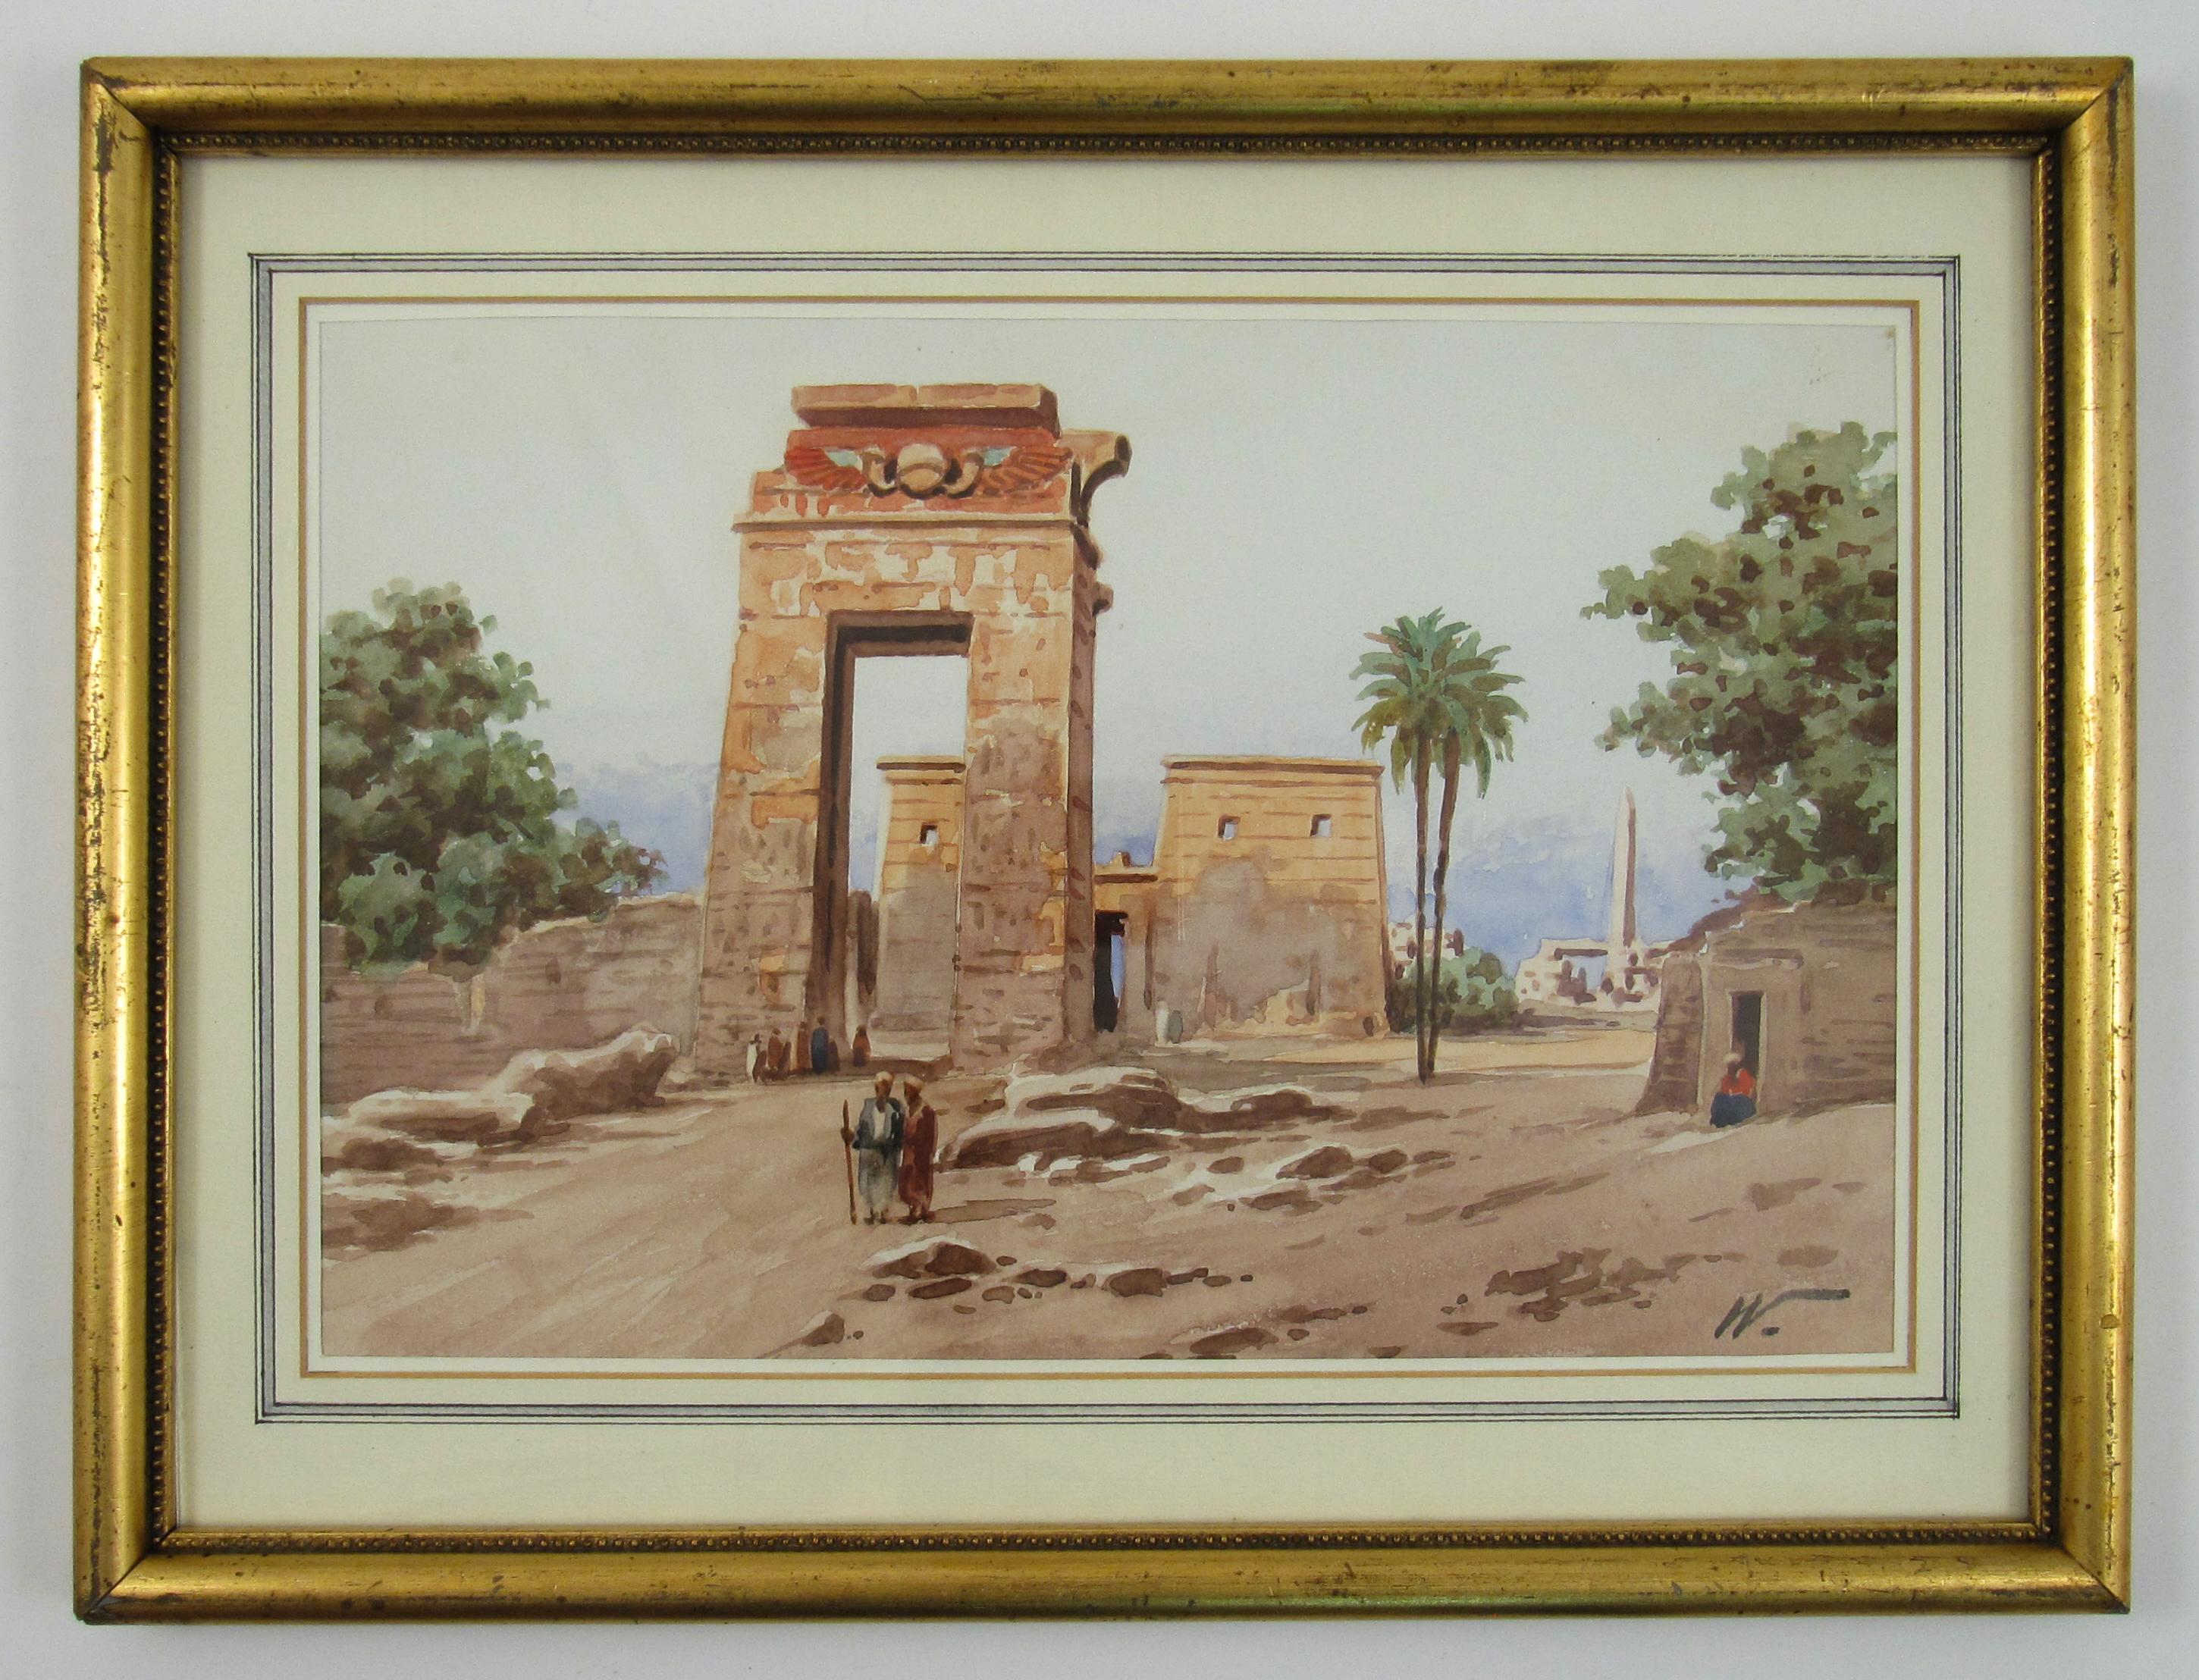 Rudolf Johann Weiss
(Swiss, * 3.9.1846 Basel; † 17.4.1933 Biel/Bienne, Switzerland)

Ancient Gateway of Ptolemy III by Thebes in Egypt

•	19th century water colour on paper, visible image ca. 19 x 29 cm
•	Vintage frame, ca. 28 x 37 cm (Later)
•	The